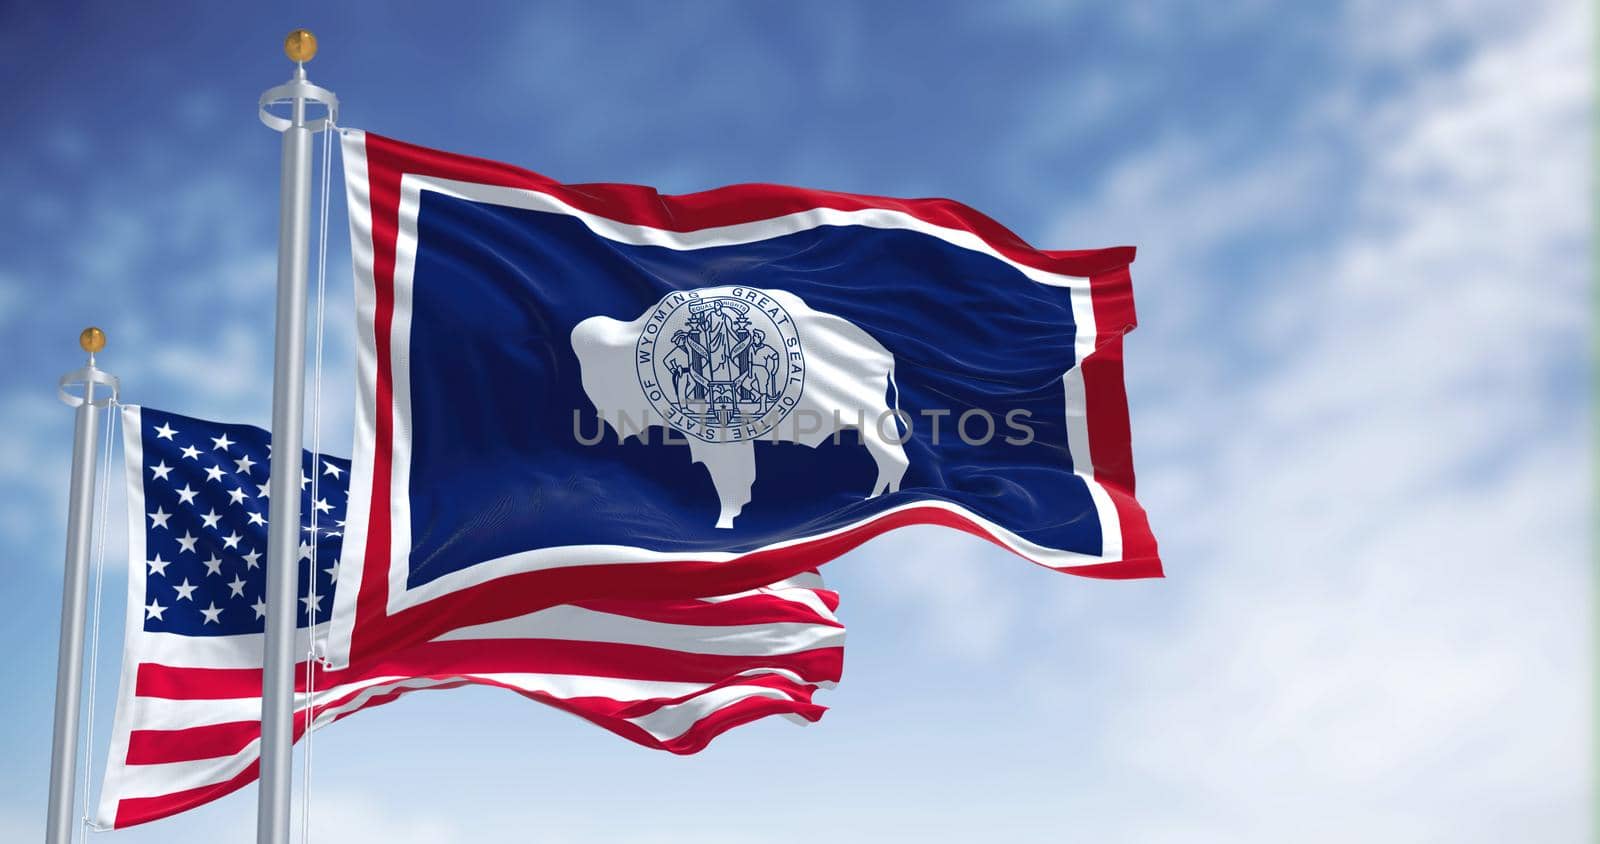 The Wyoming state flag waving along with the national flag of the United States of America. Wyoming is a state in the Mountain West subregion of the Western United States